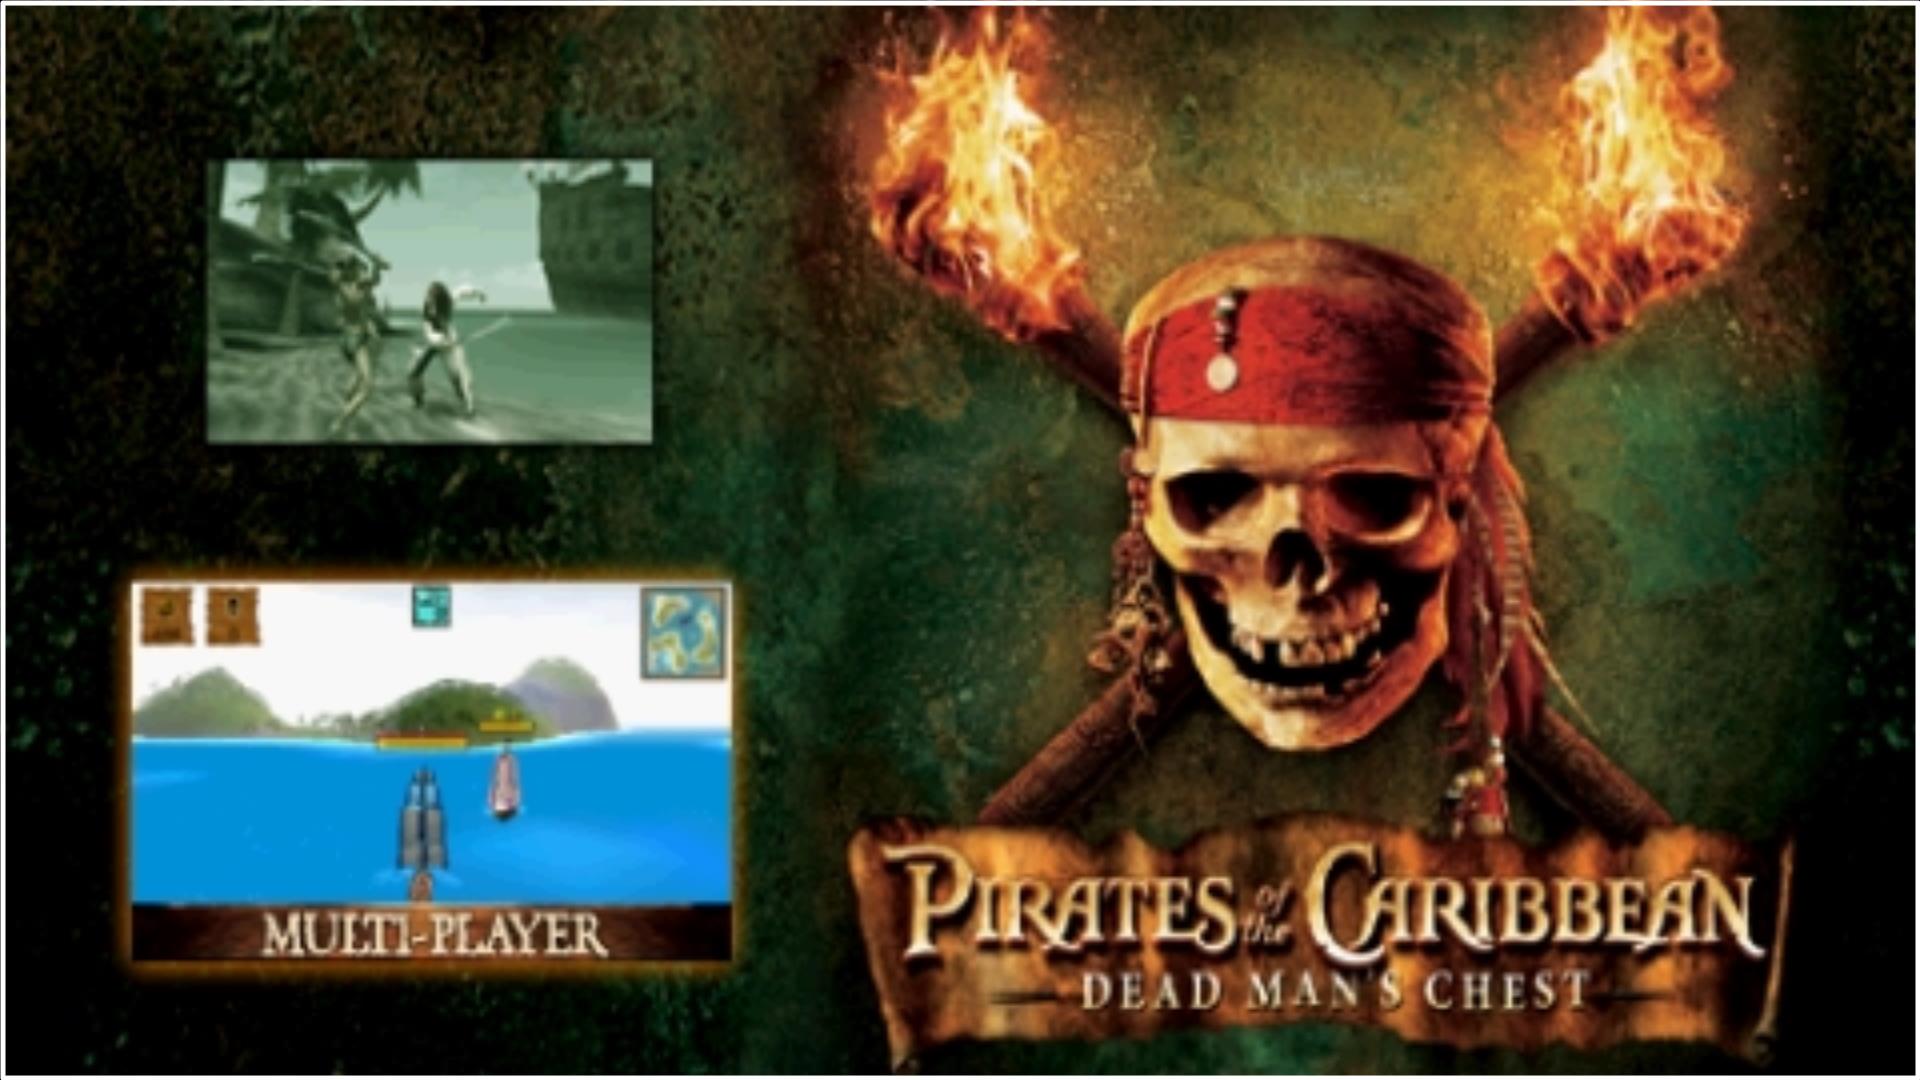 Pirates Of The Caribbean Dead Man’s Chest Highly Compressed PSP(Ppsspp Game) ISO File For Android 1